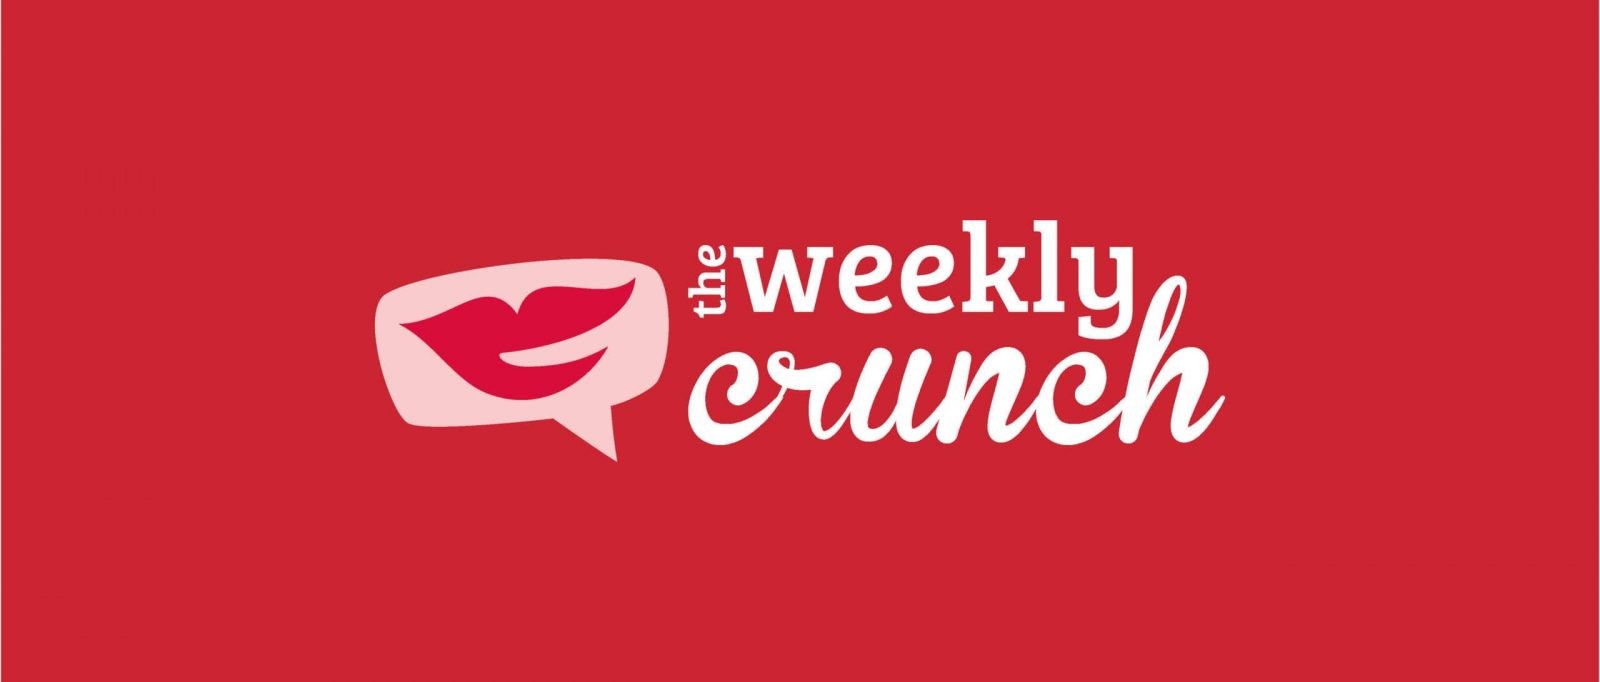 the-weekly-crunch-crunchytales